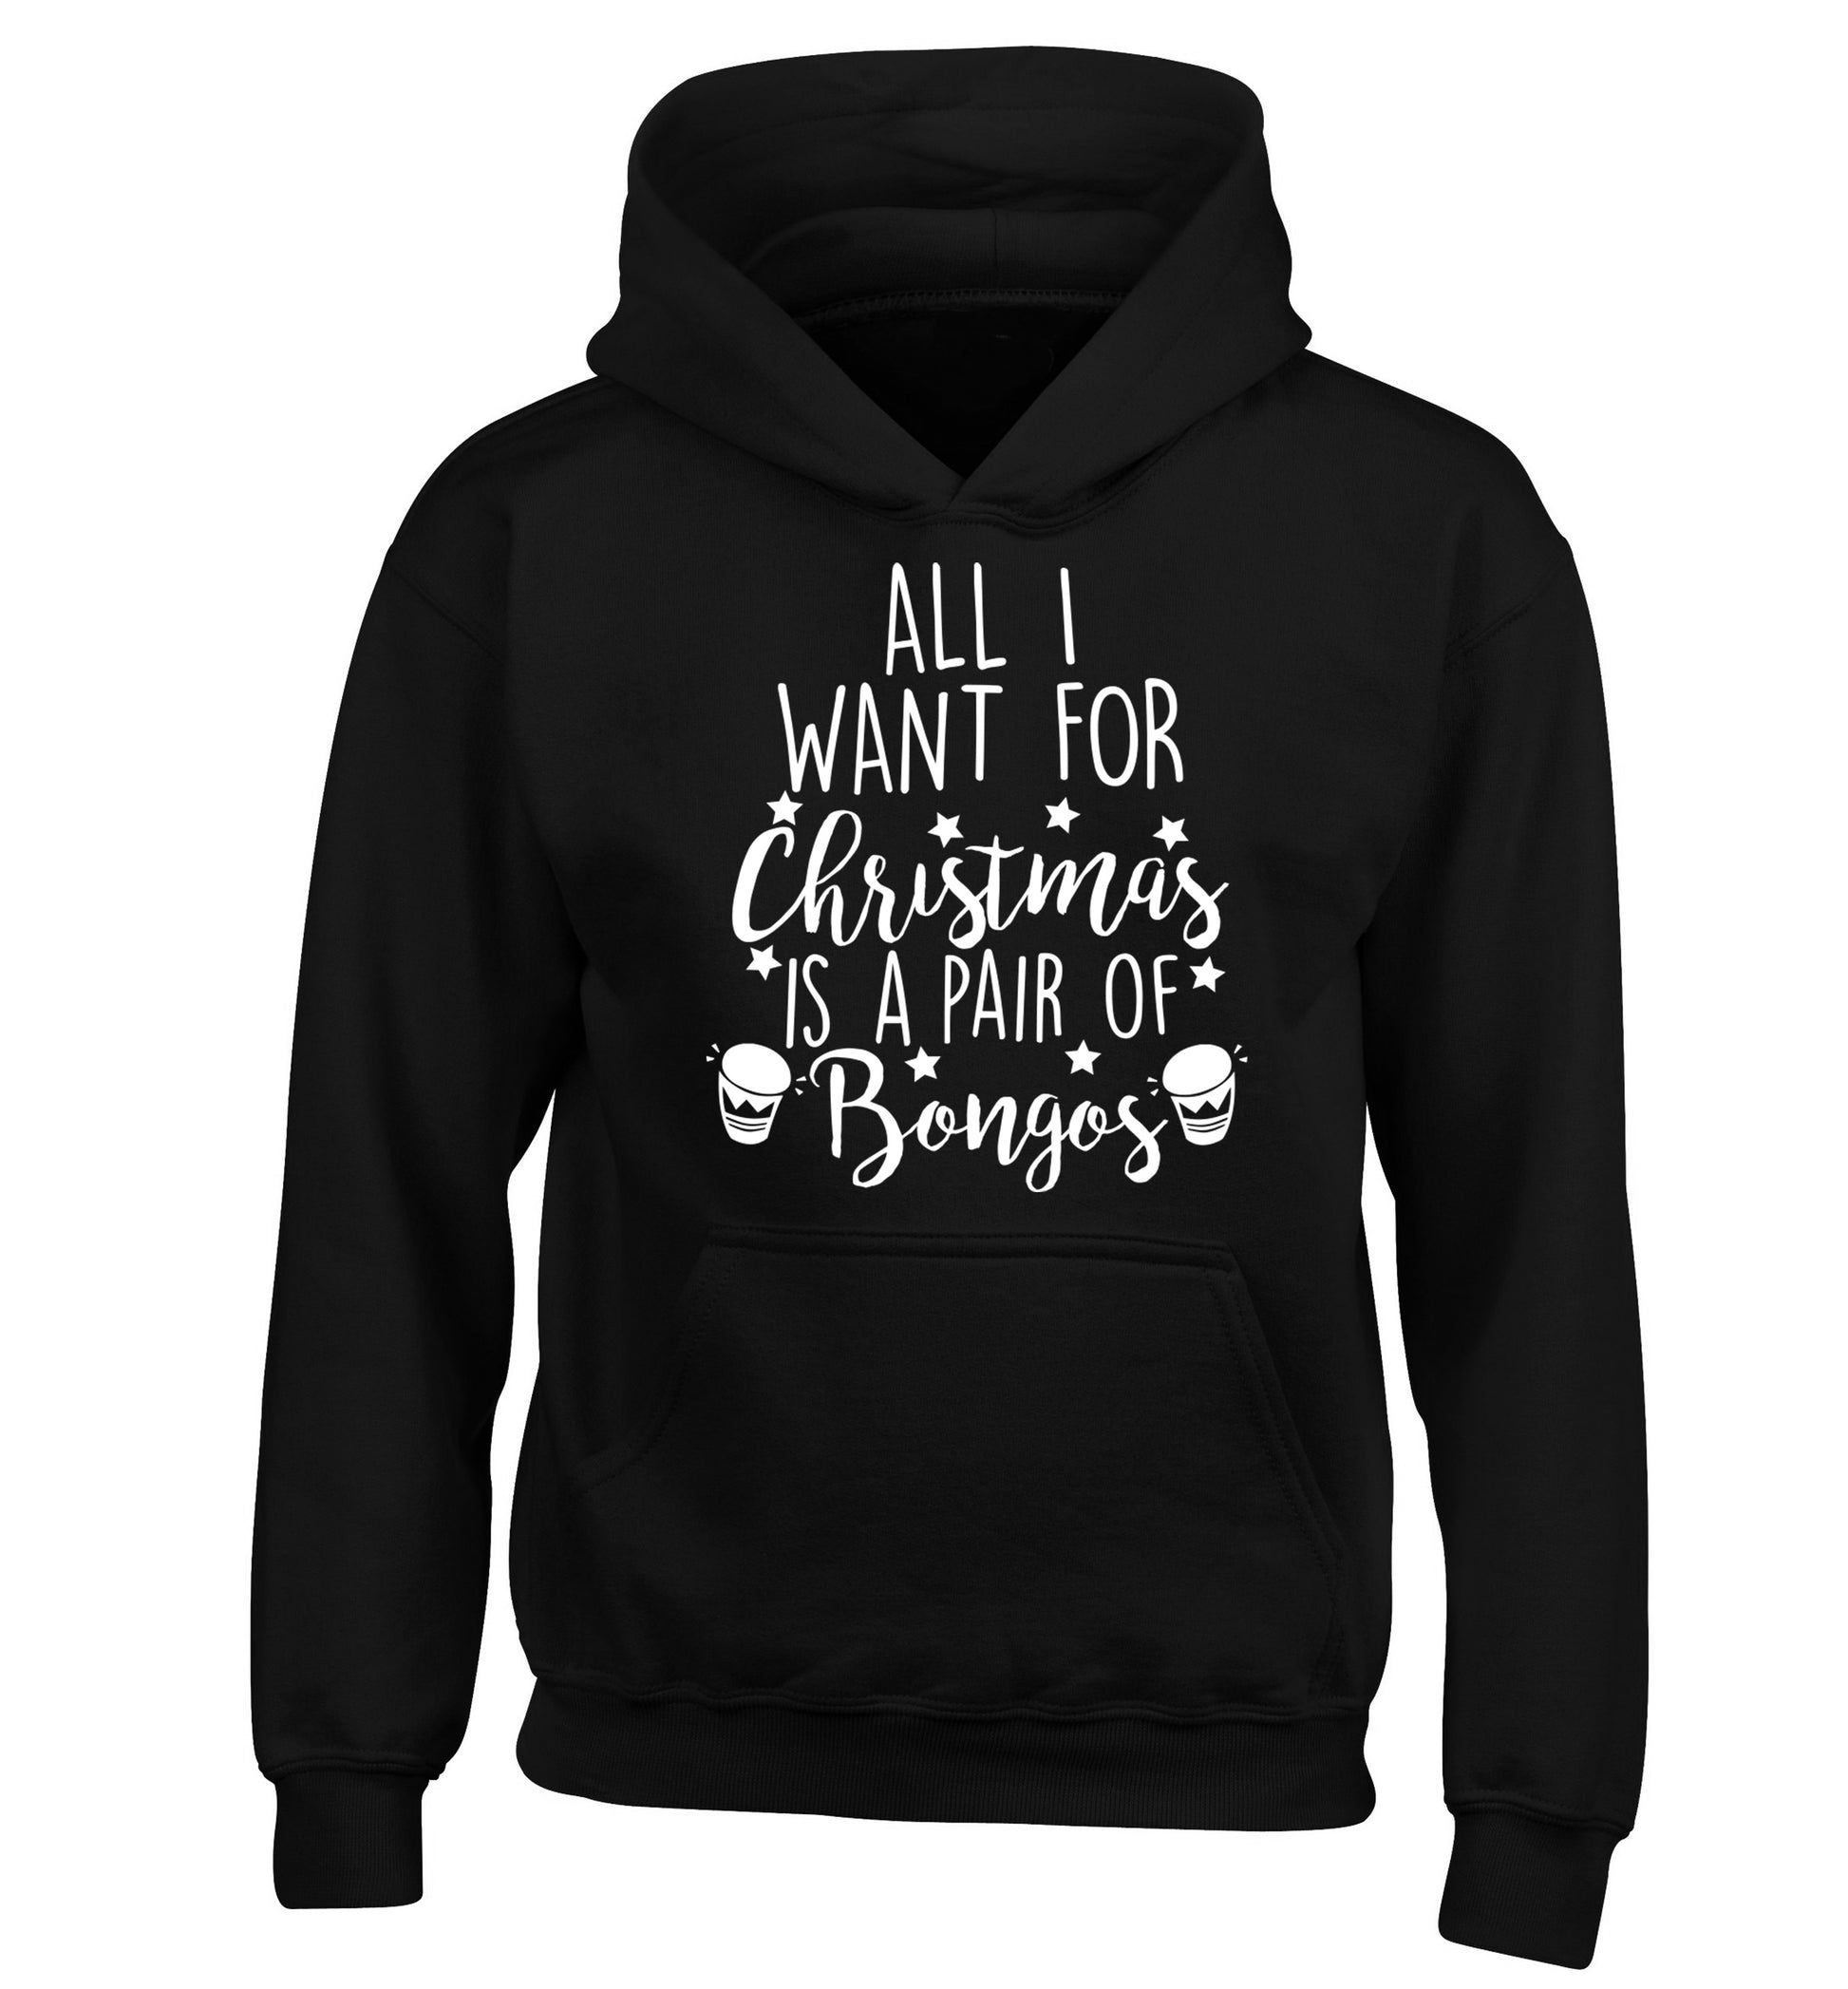 All I want for Christmas is a pair of bongos! children's black hoodie 12-14 Years